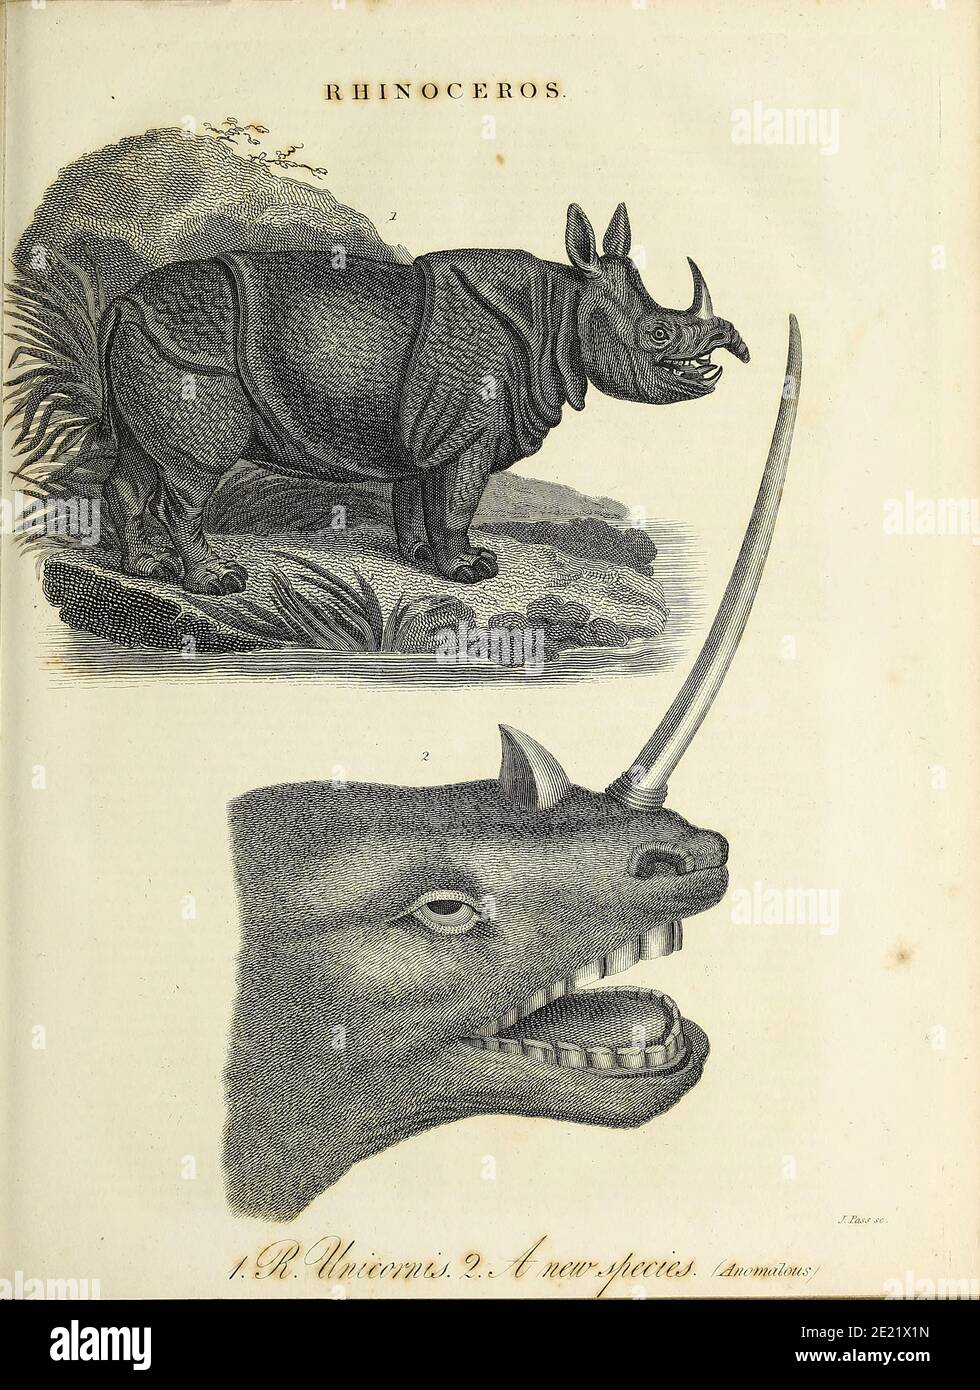 Rhinoceros (a new species [imaginary]) Copperplate engraving From the Encyclopaedia Londinensis or, Universal dictionary of arts, sciences, and literature; Volume XXII;  Edited by Wilkes, John. Published in London in 1827 Stock Photo